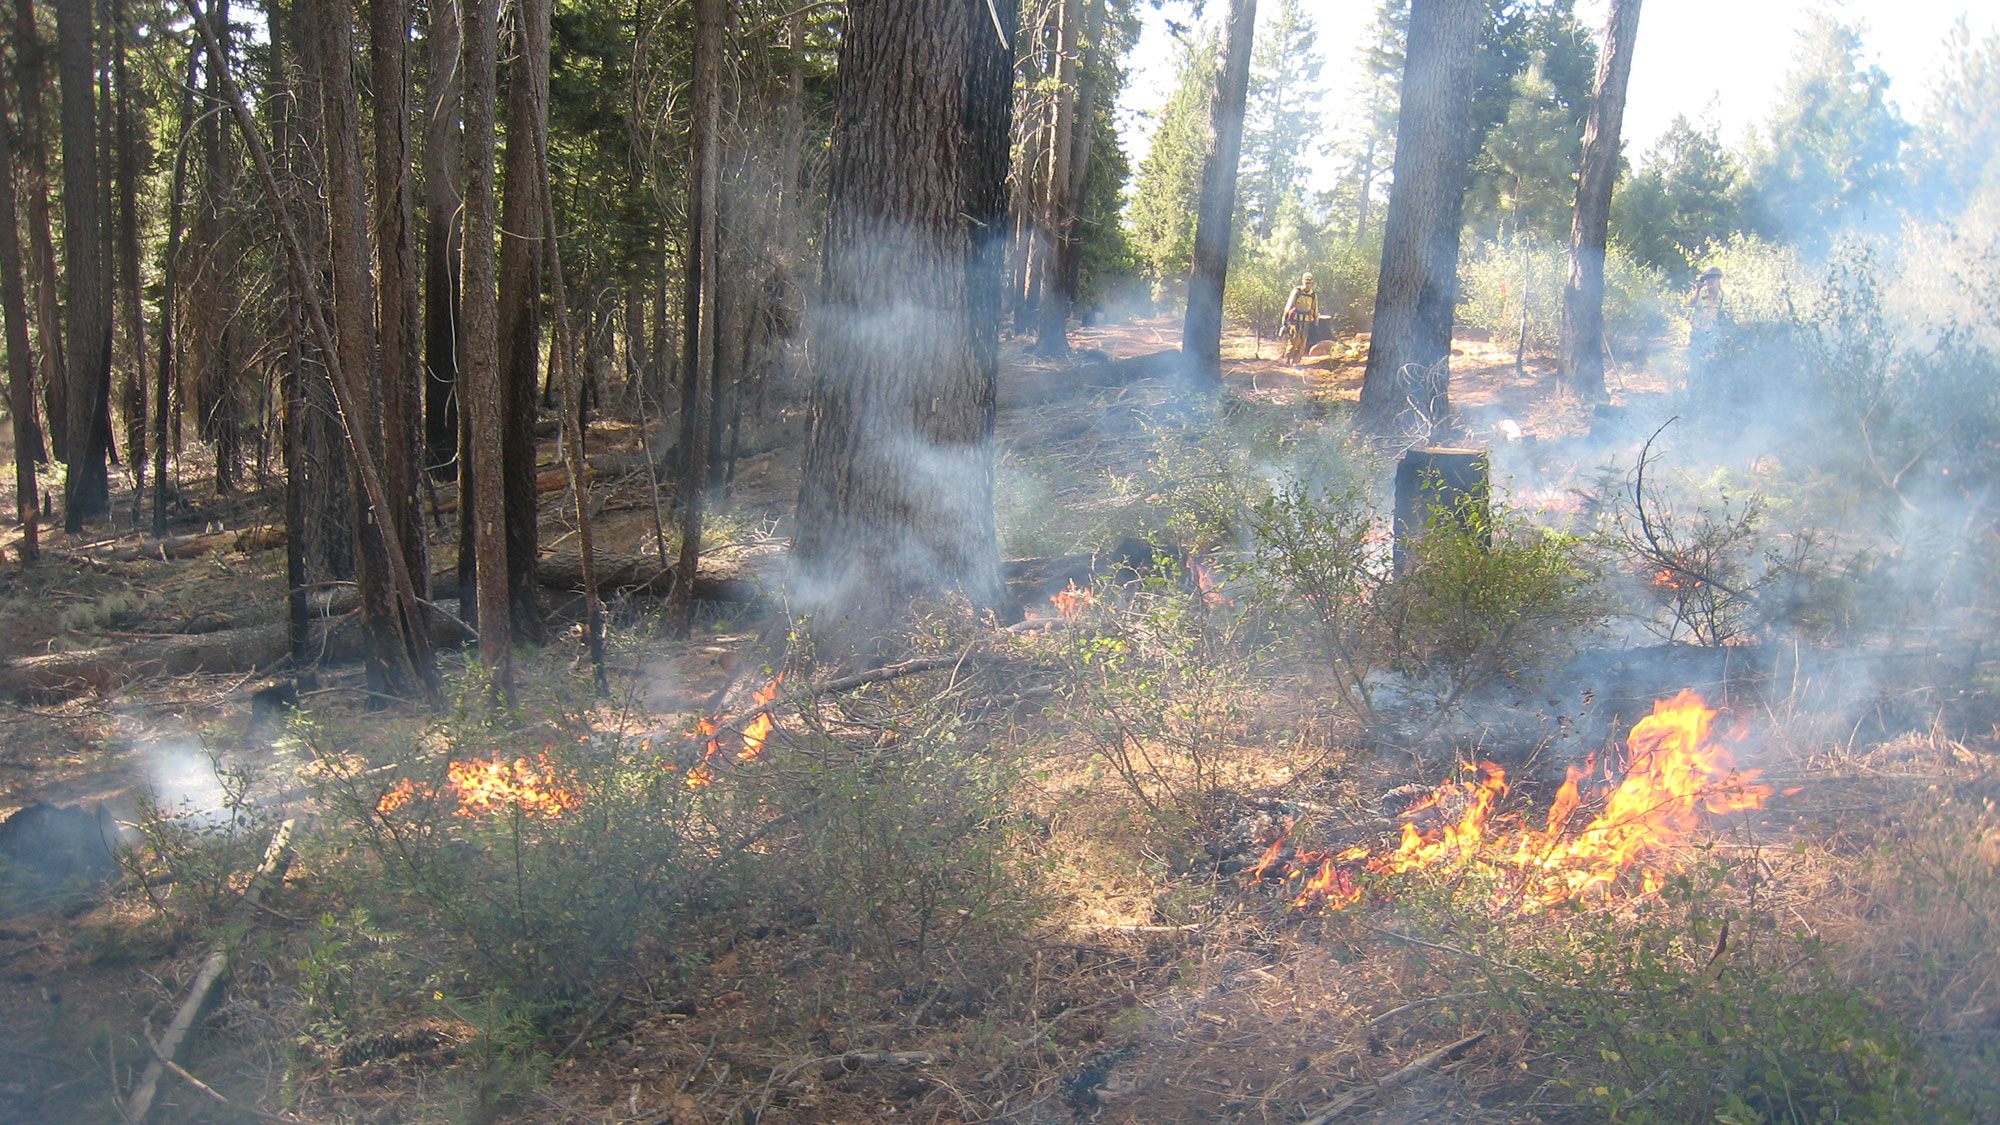 A photo of a prescribed burn in a conifer forest. The fire is burning through small bushes on the forest floor.